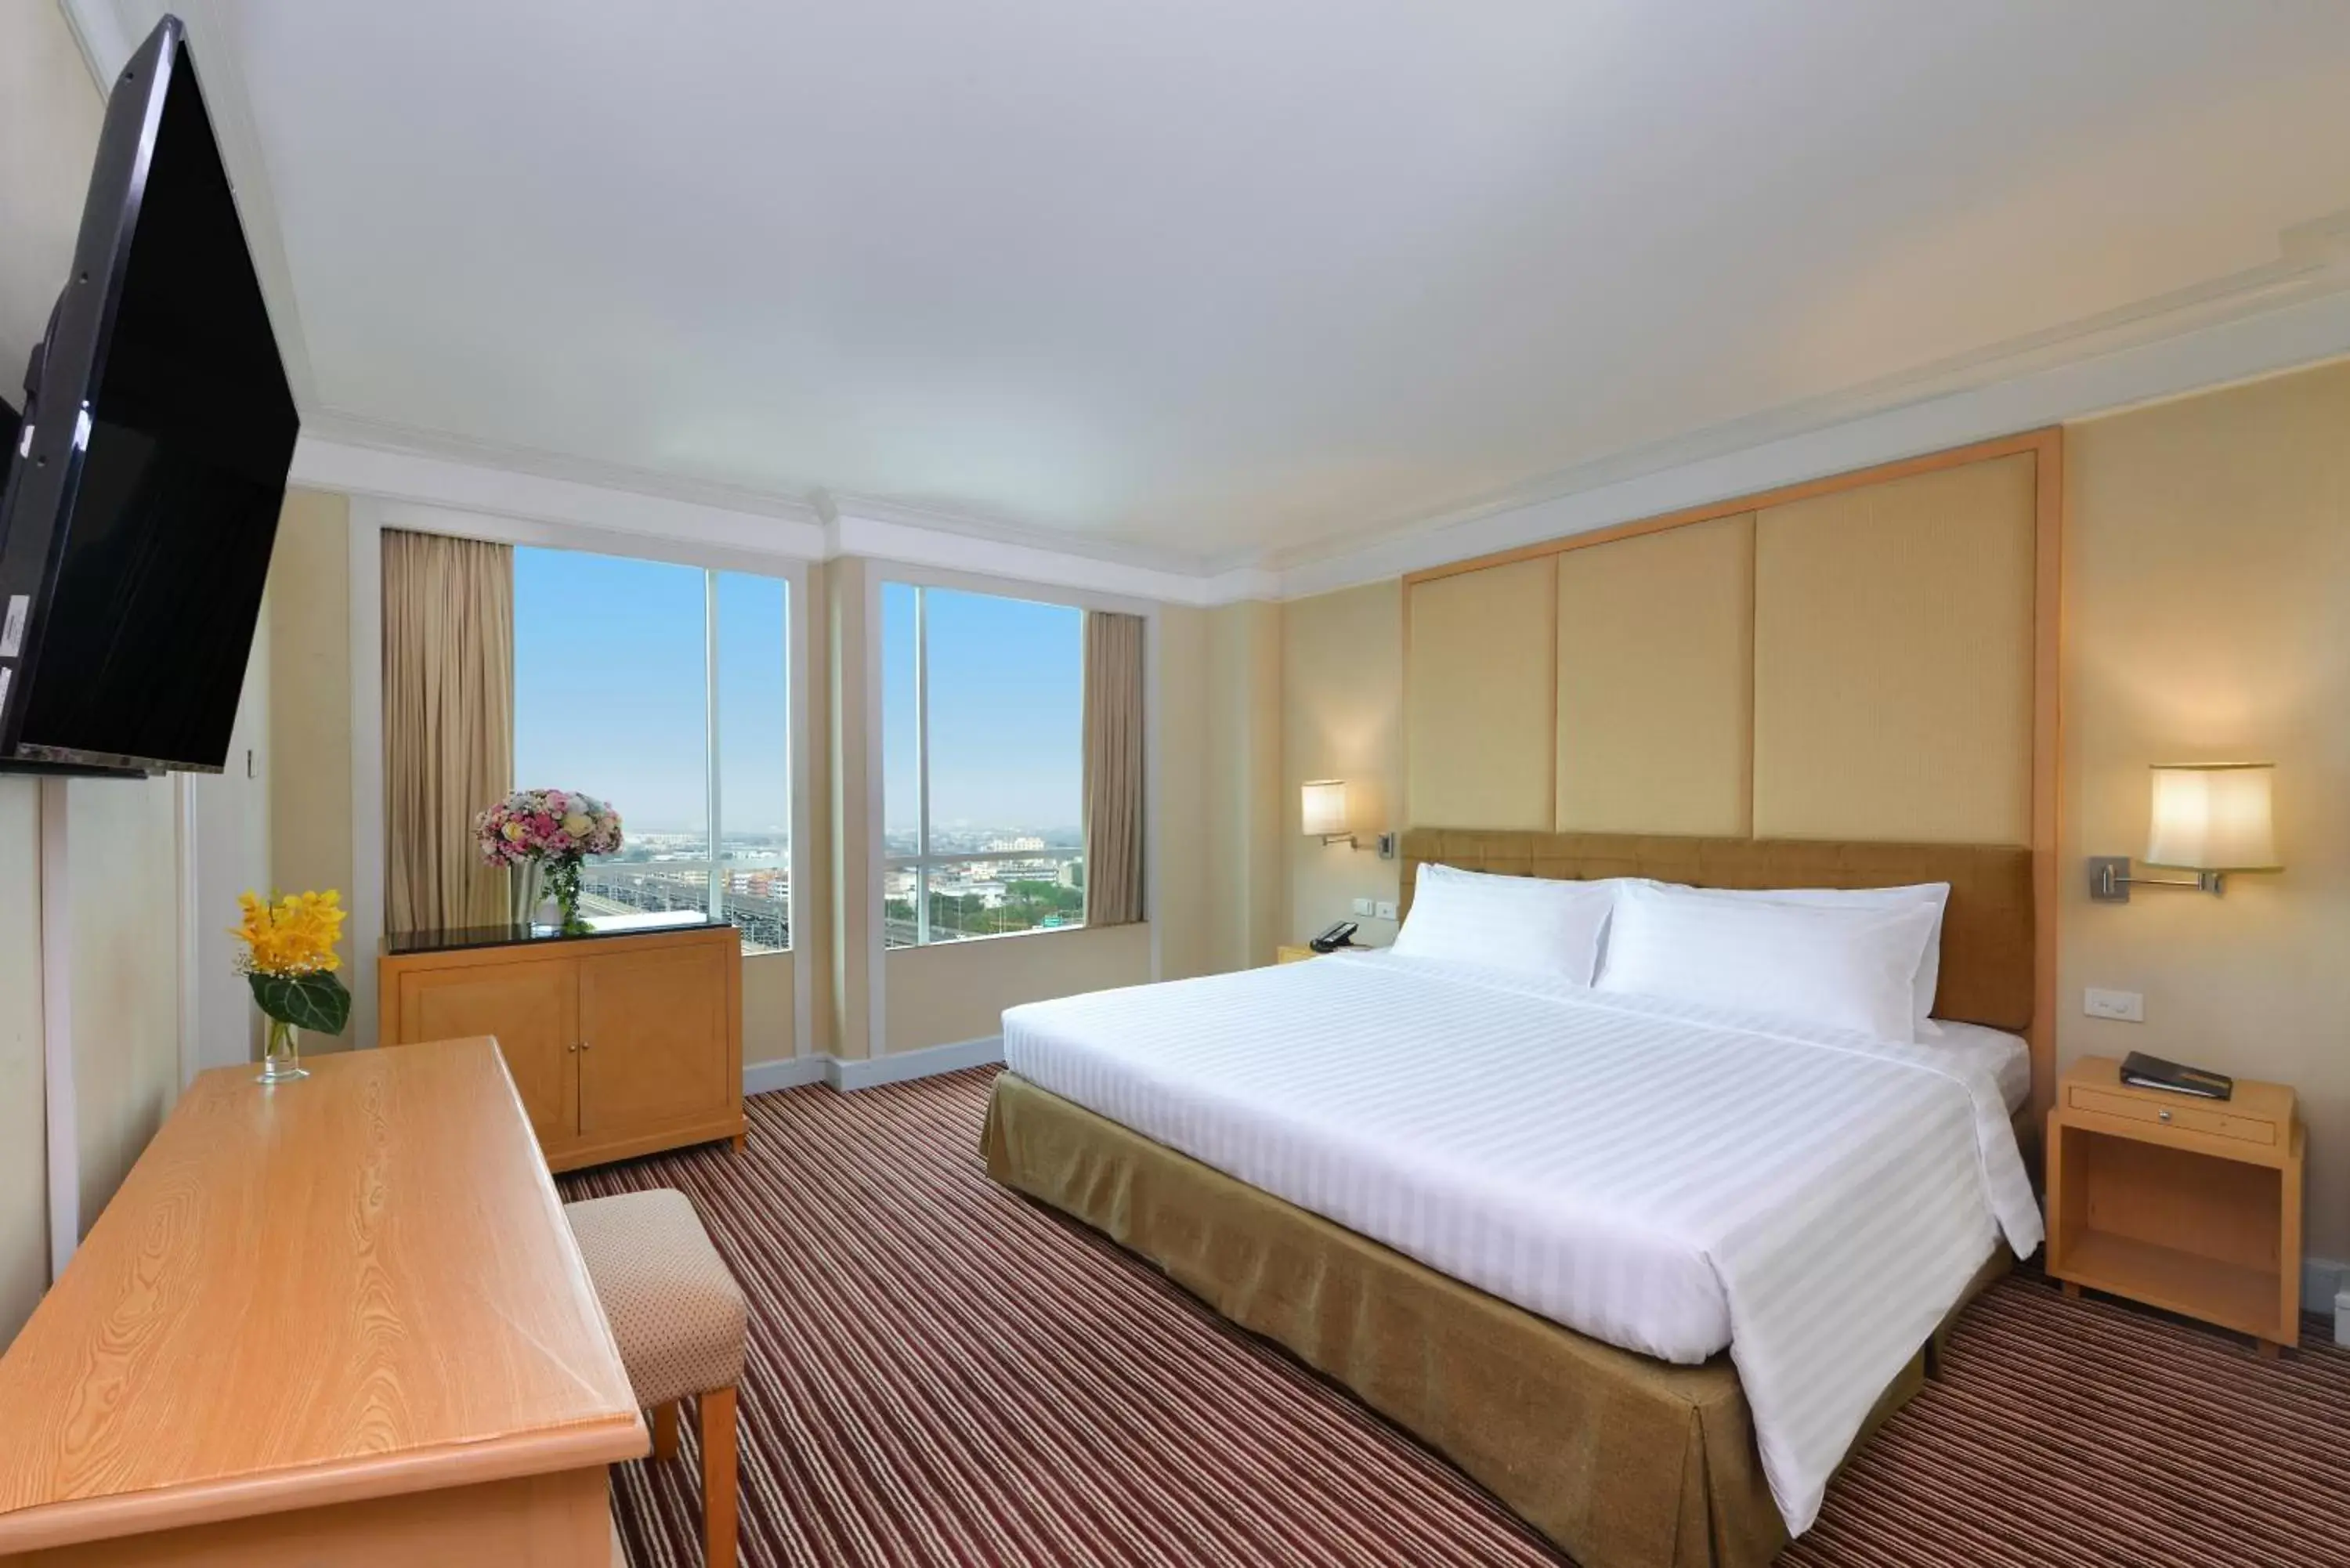 Bedroom, Bed in Miracle Grand Convention Hotel